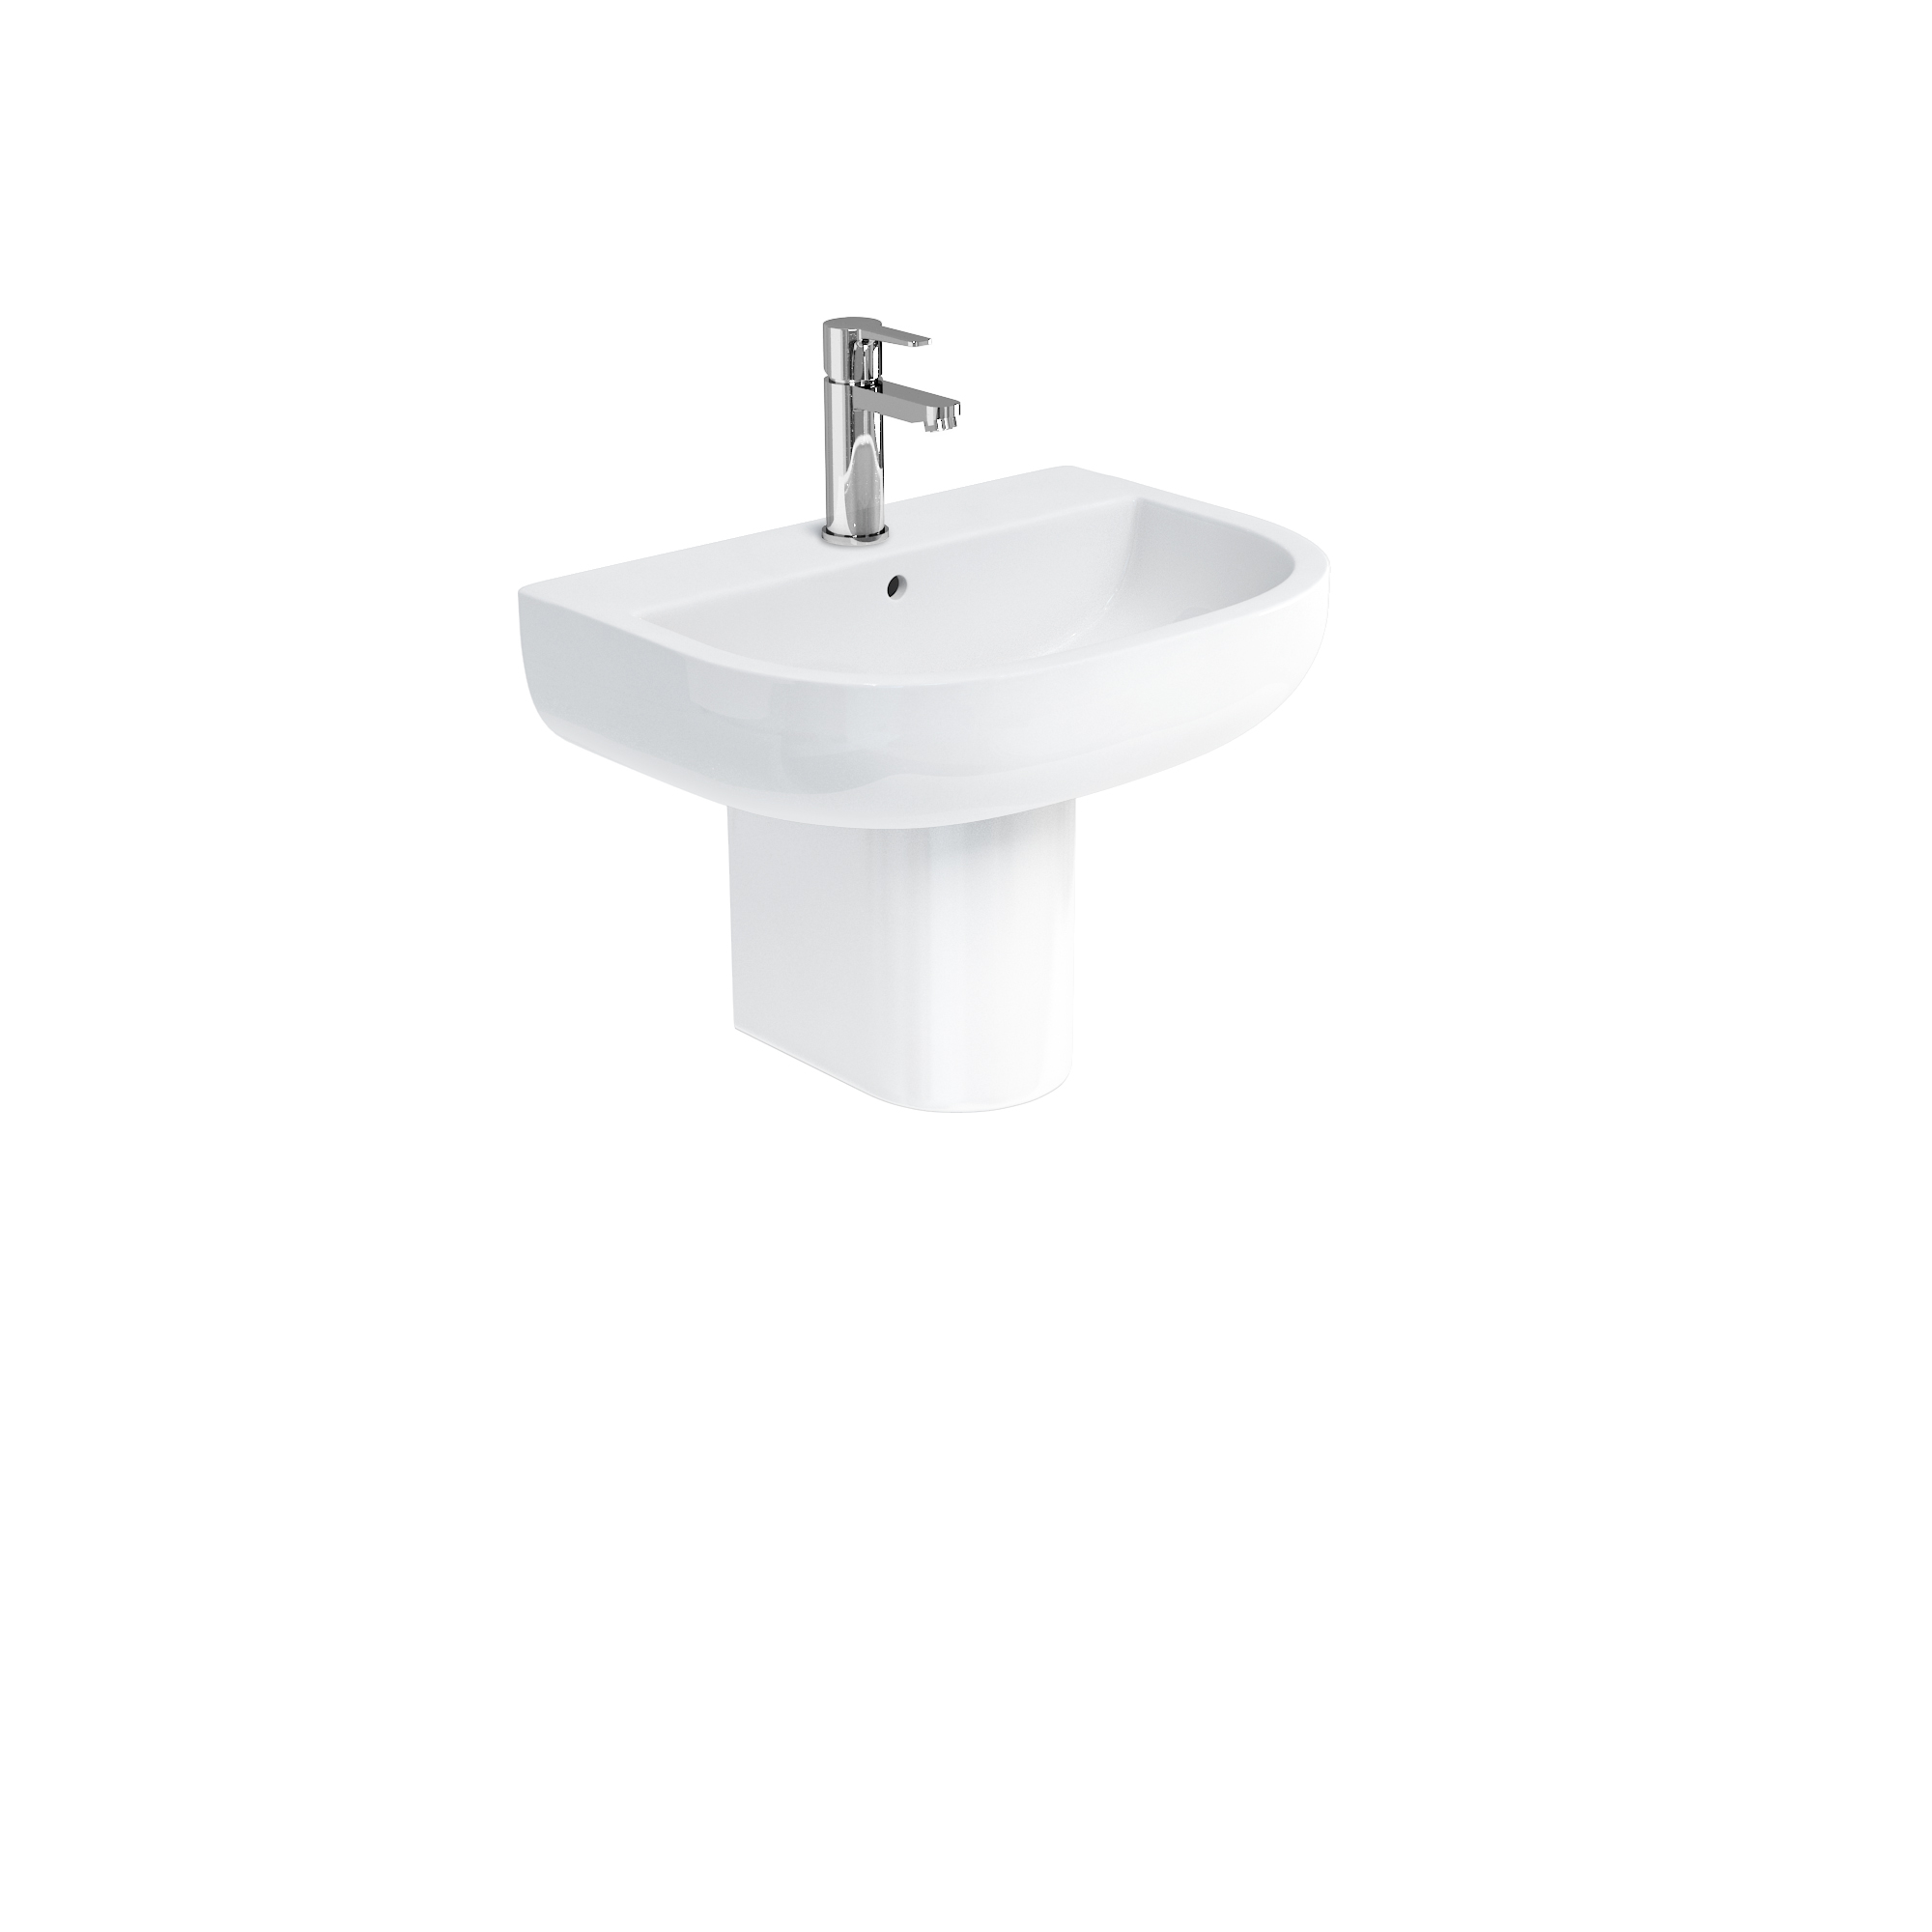 Compact 550 basin and round fronted semi pedestal